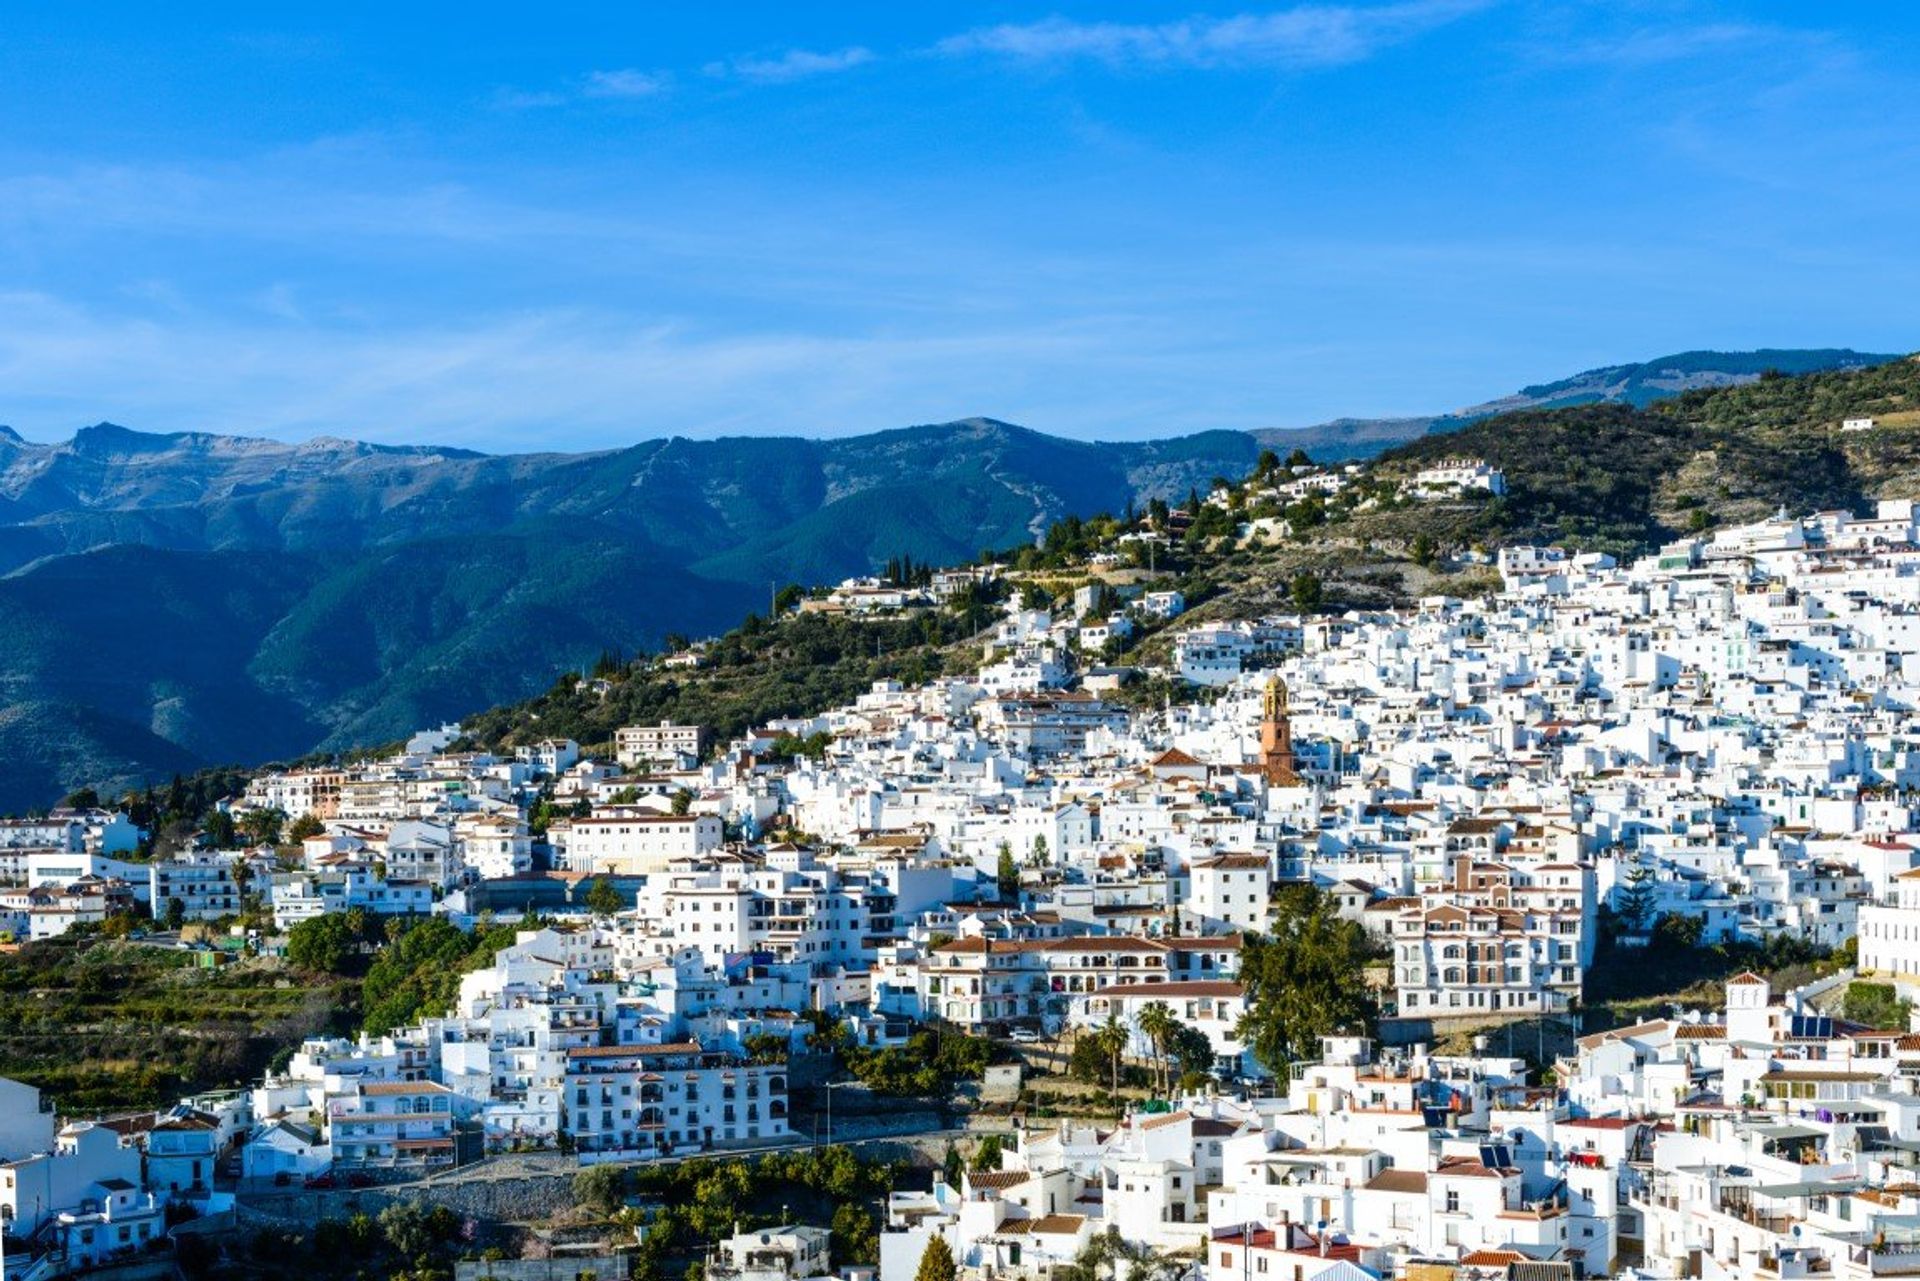 Competa is a whitewashed inland village with a whole lot of Andalucian charm and incredible mountain views